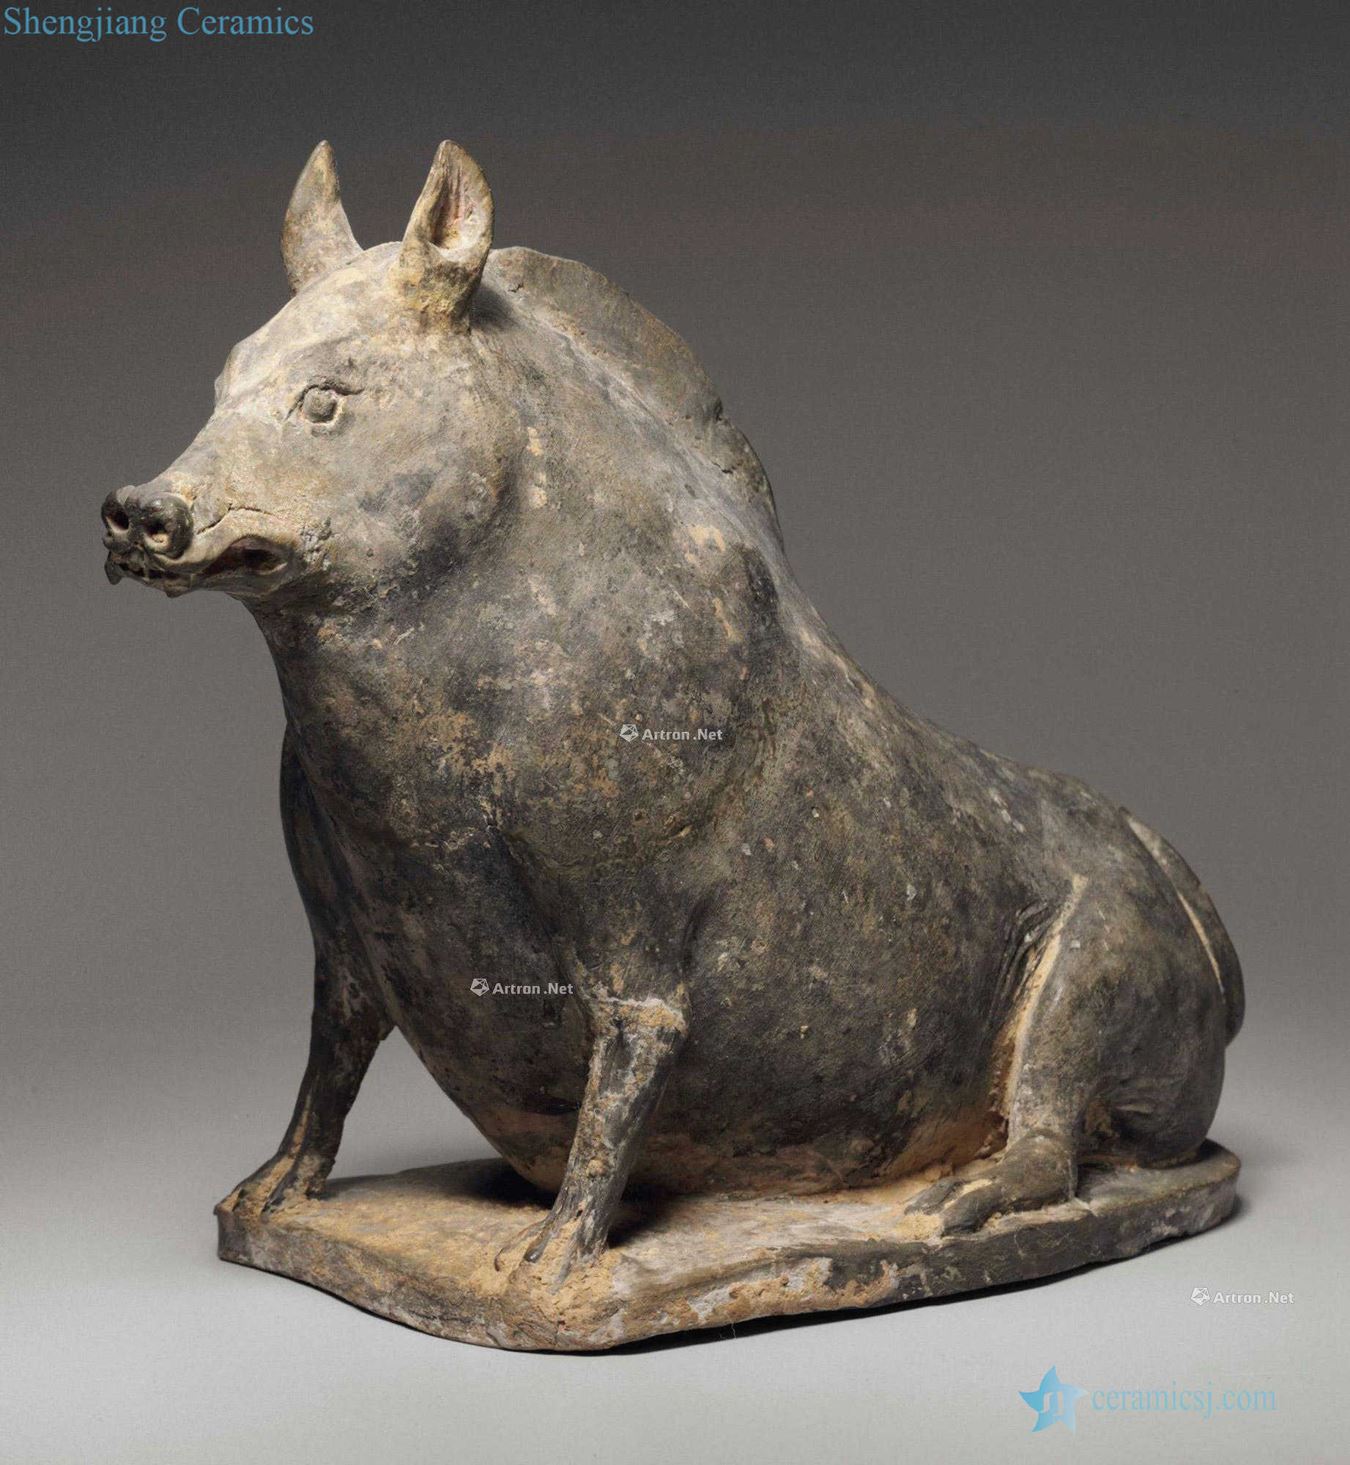 NORTHERN WEI DYNASTY, the EARLY 5TH CENTURY A GREY POTTERY FIGURE OF A SEATED BOAR